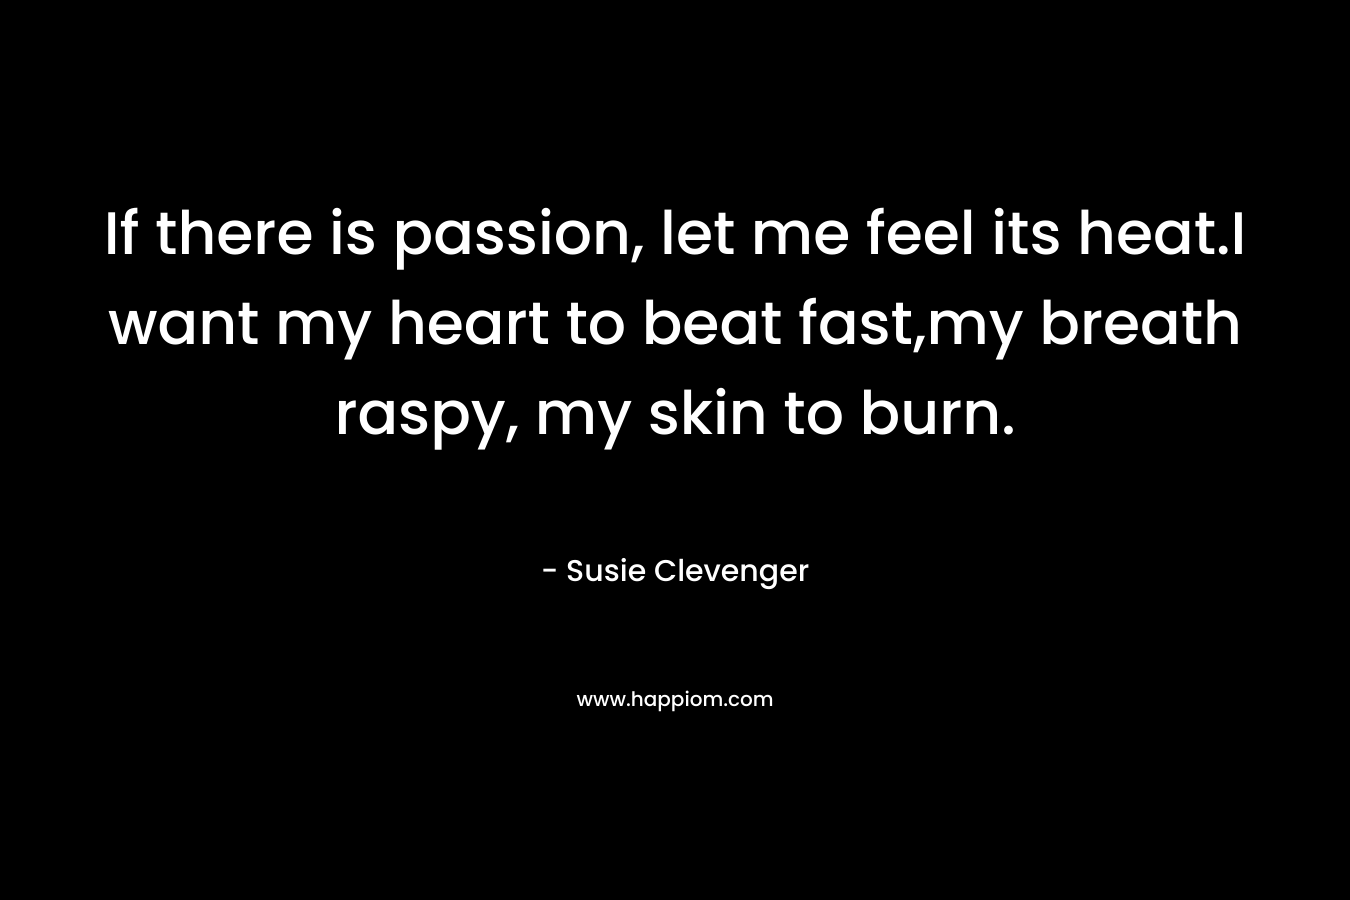 If there is passion, let me feel its heat.I want my heart to beat fast,my breath raspy, my skin to burn. – Susie Clevenger